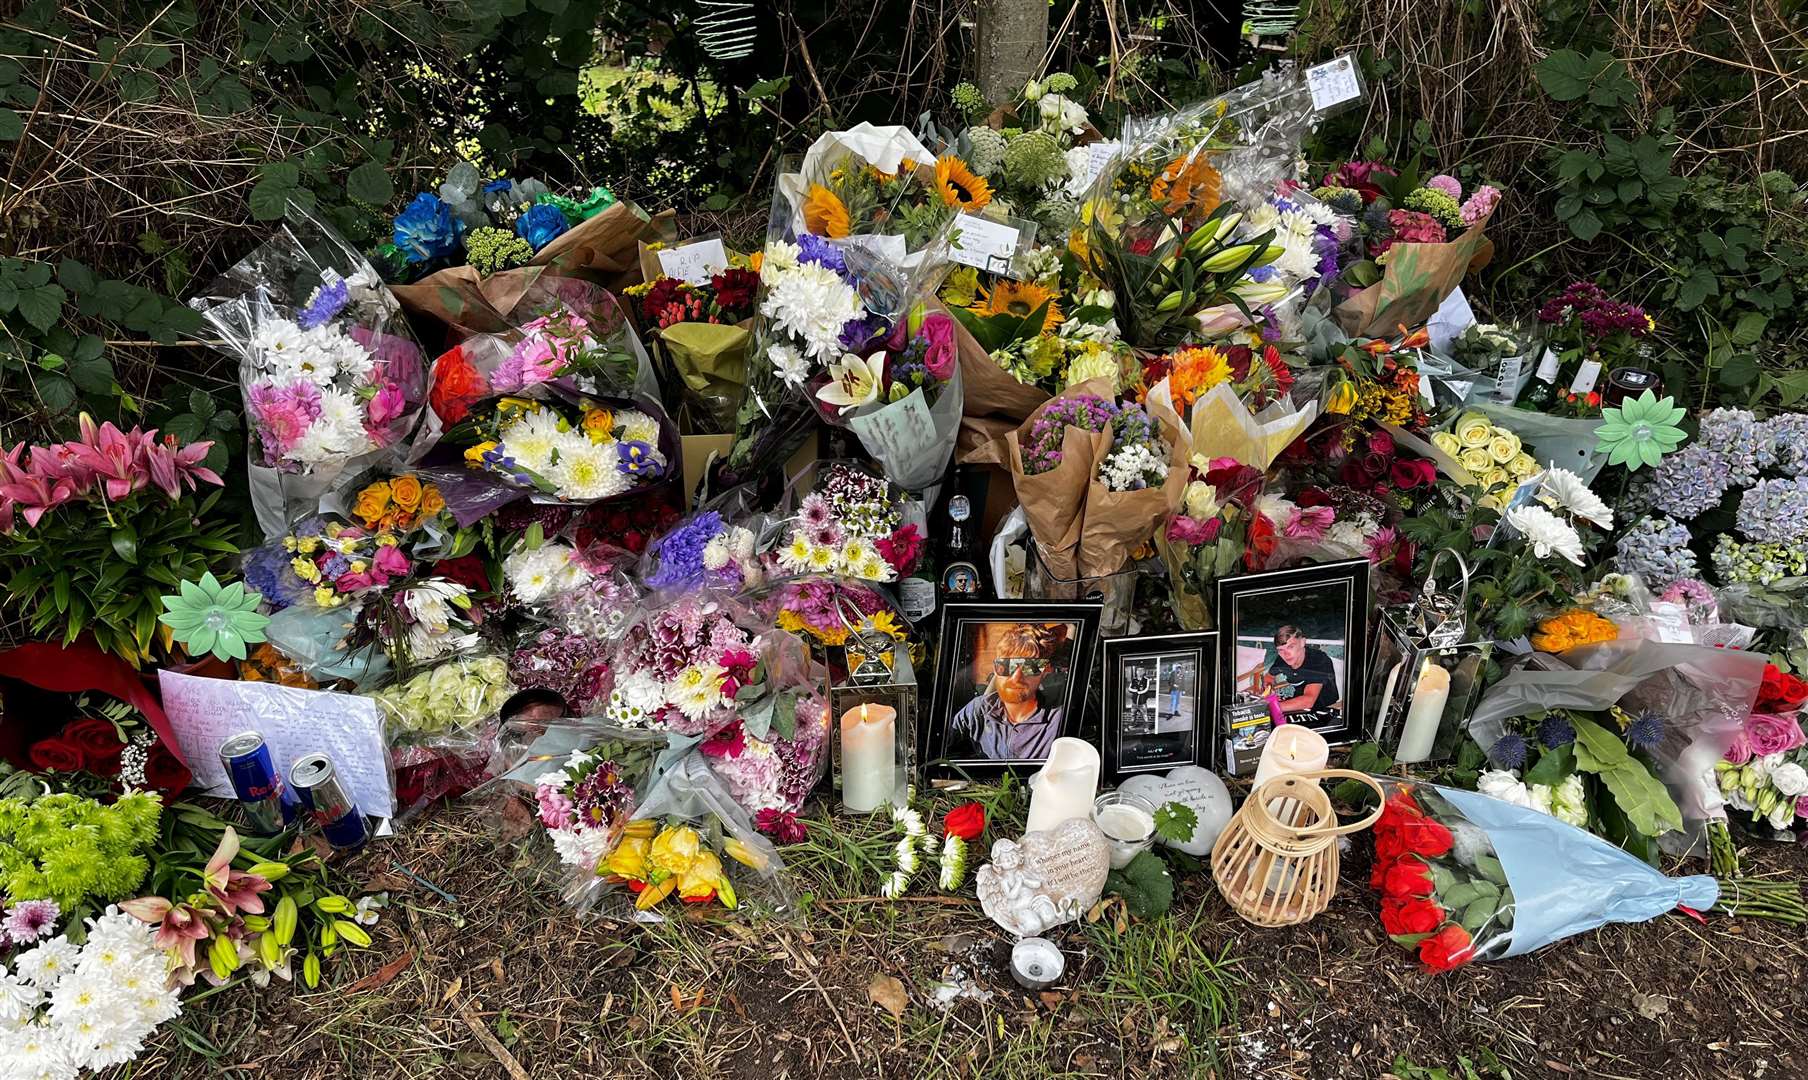 Floral tributes have been left to the two young men